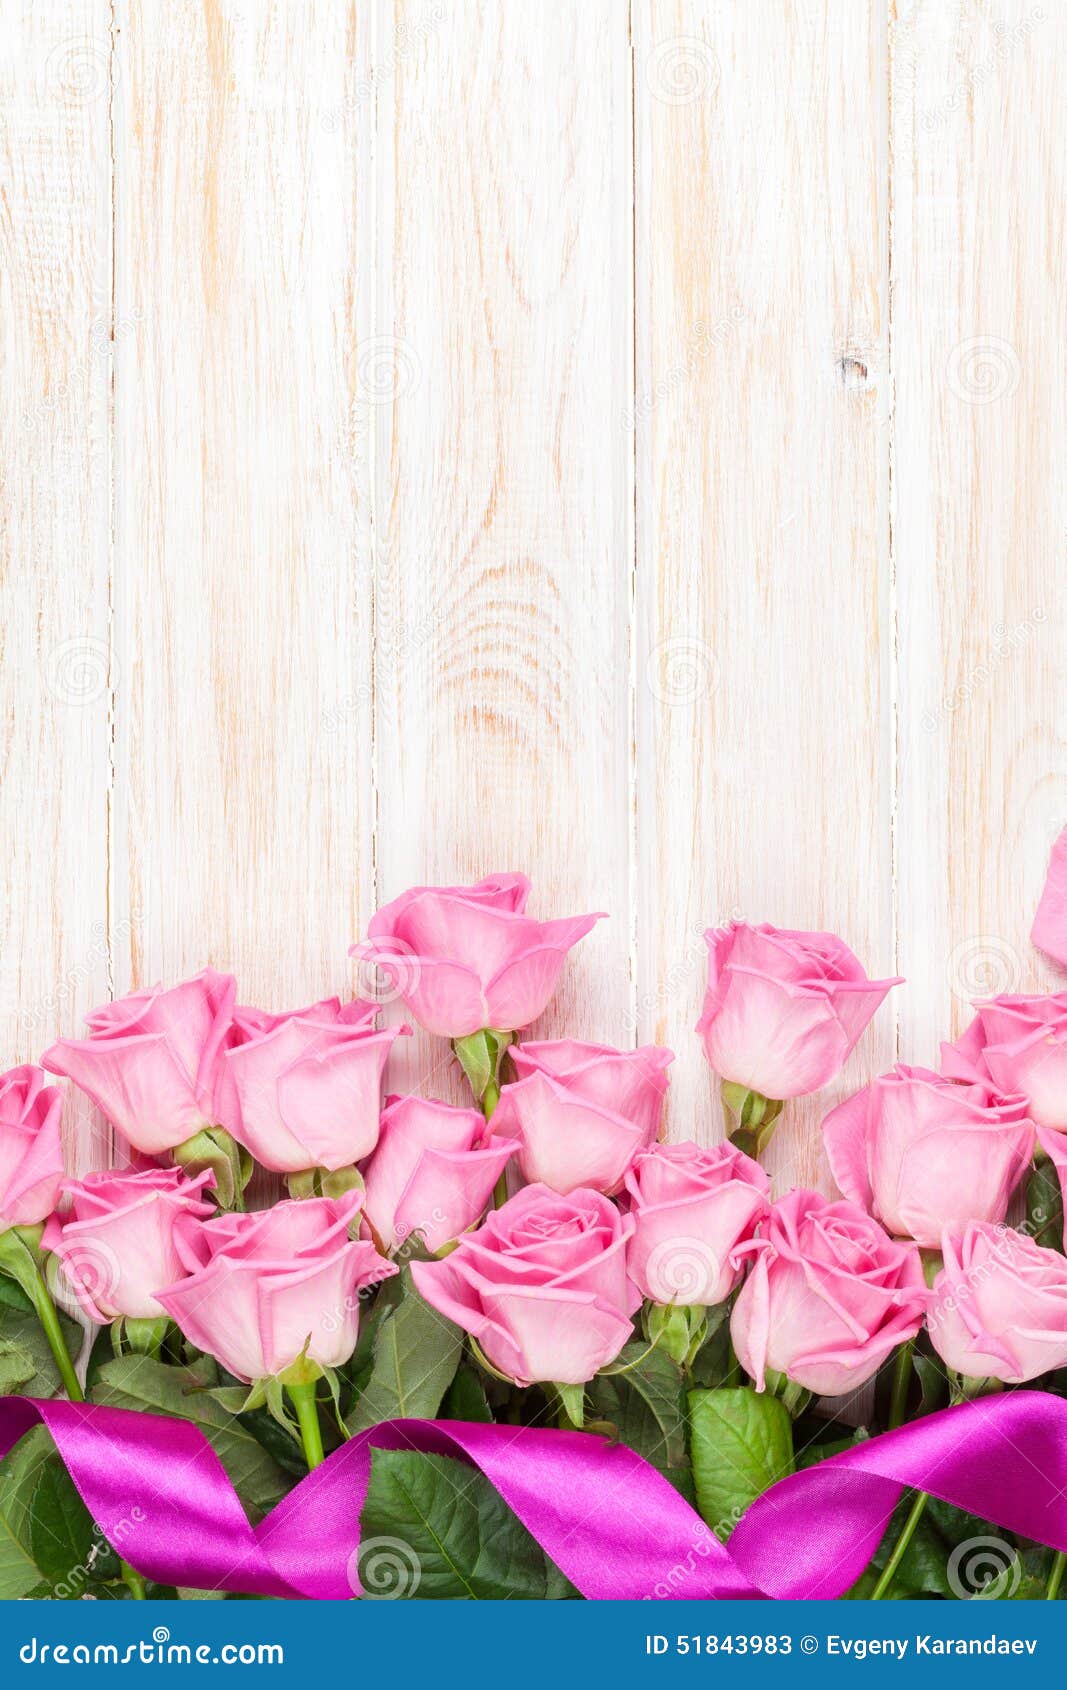 Pink Roses Bouquet Over Wooden Table Stock Image - Image of romantic ...